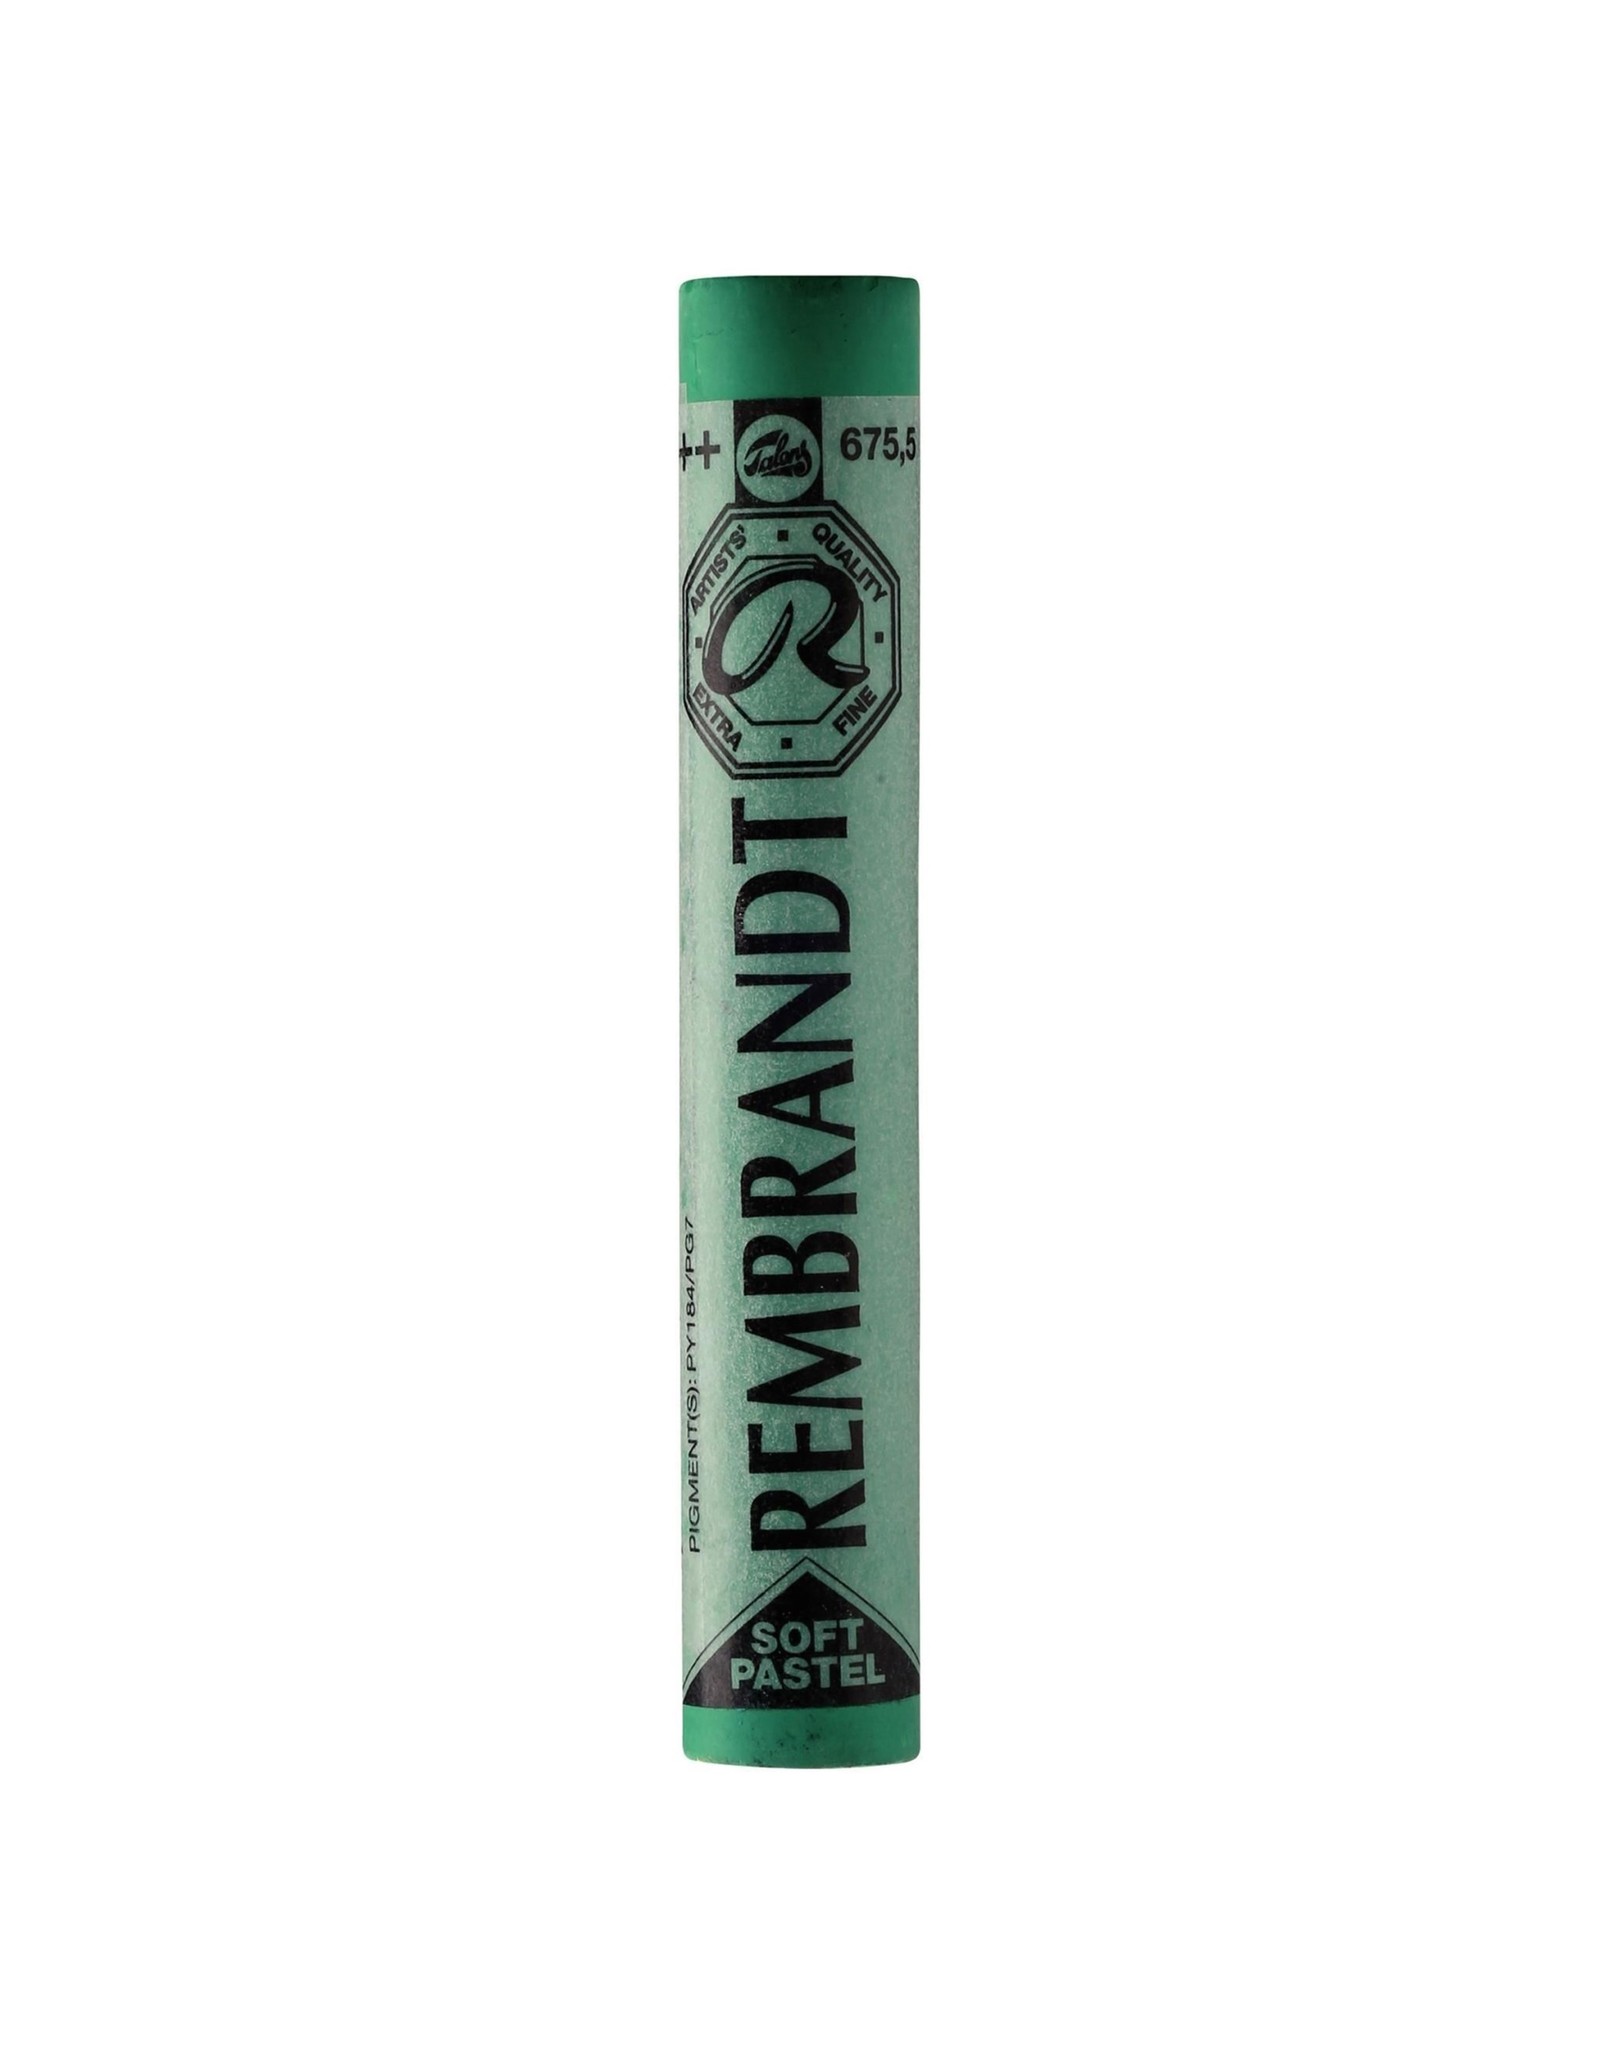 Royal Talens Rembrandt Soft Pastel, Phthalo Green 5